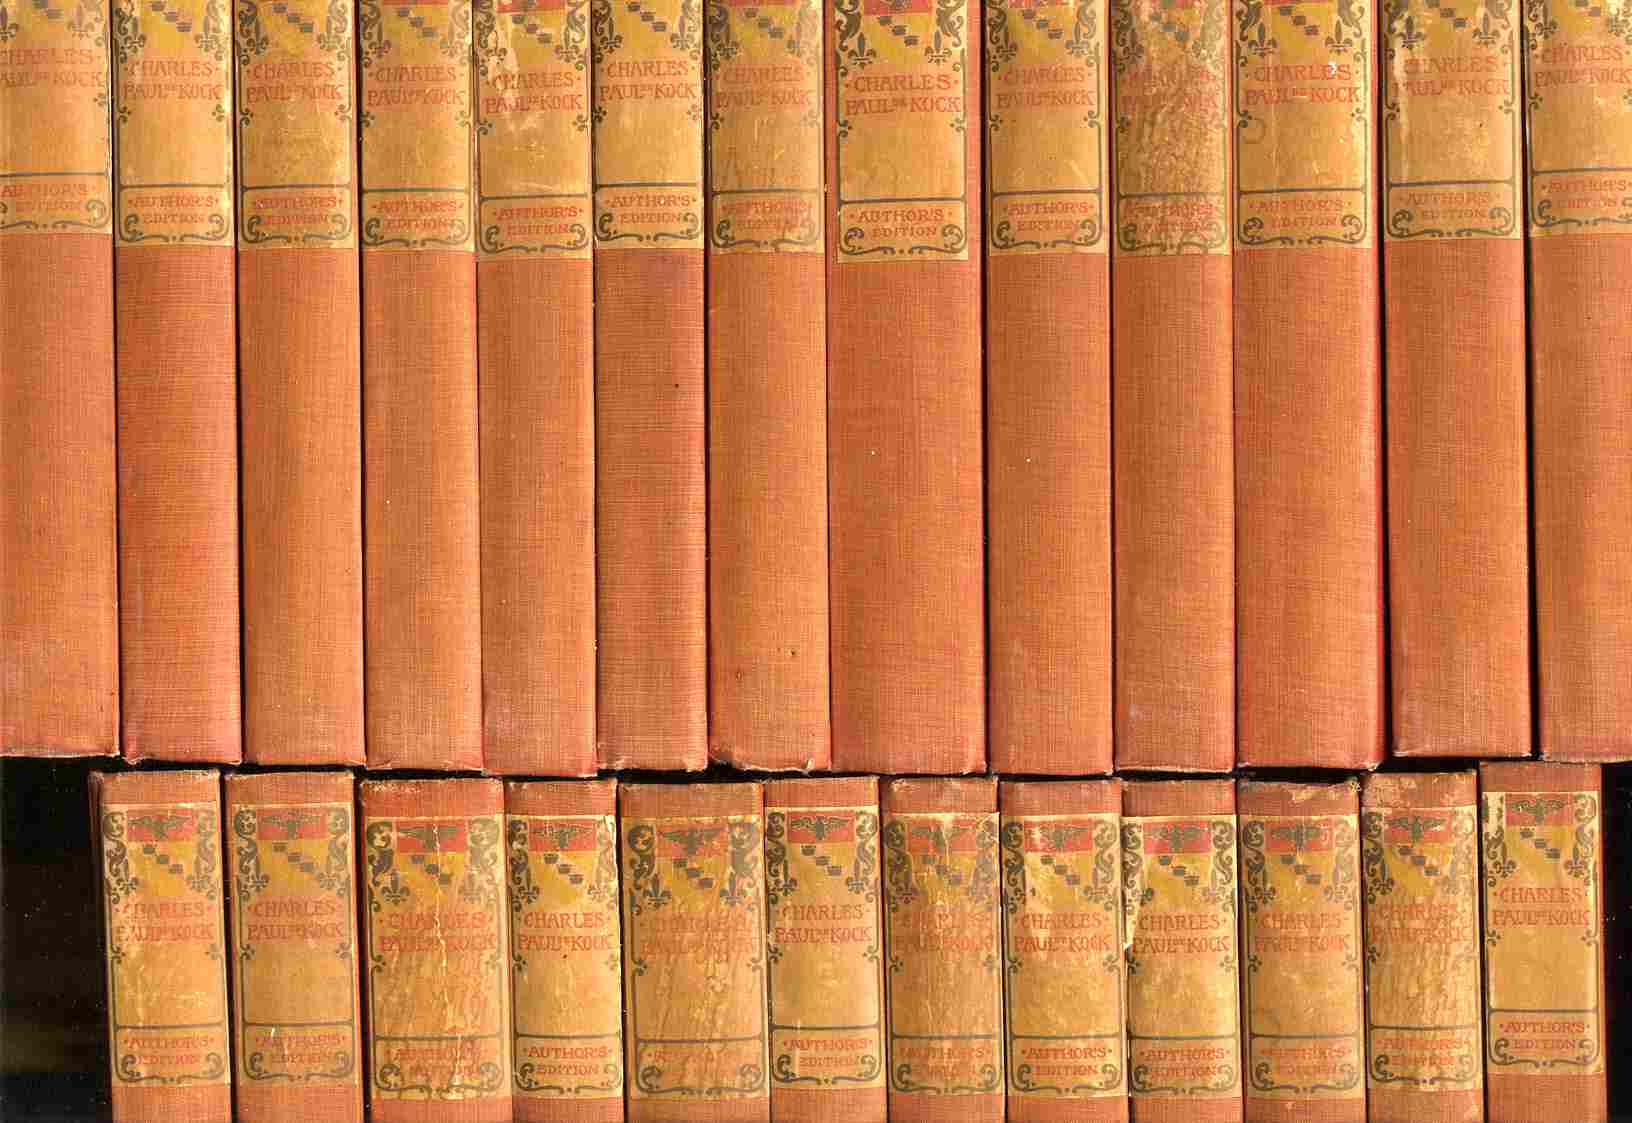 Image for THE WORKS OF CHARLES PAUL DEKOCK 25 VOLS AUTHOR'S EDITION